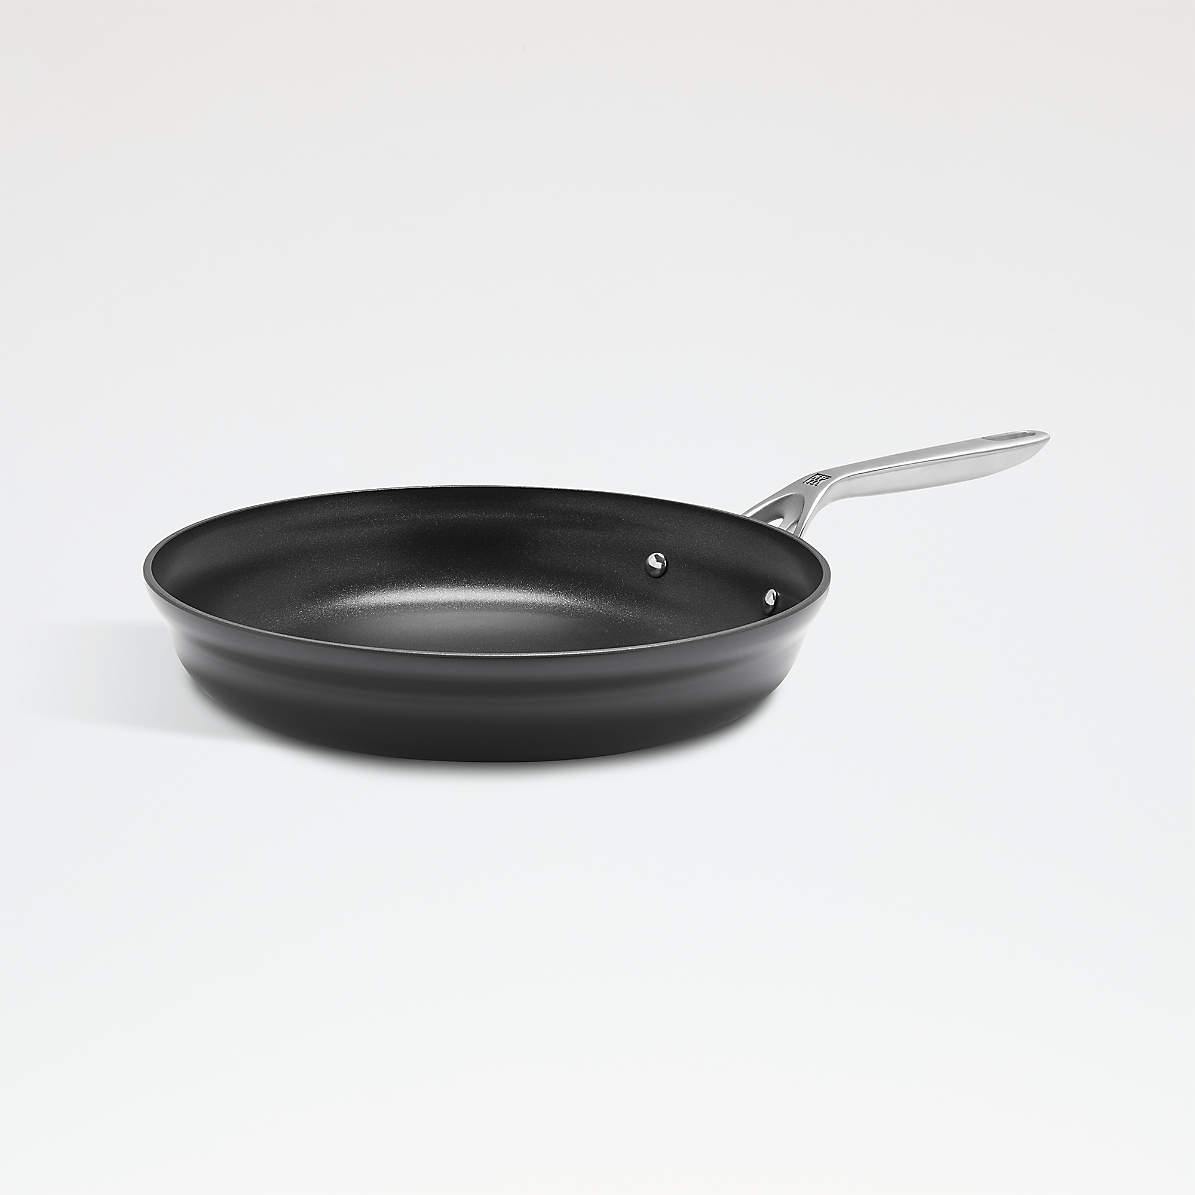 ZWILLING Motion Hard Anodized Aluminum Nonstick Fry Pan - Bed Bath